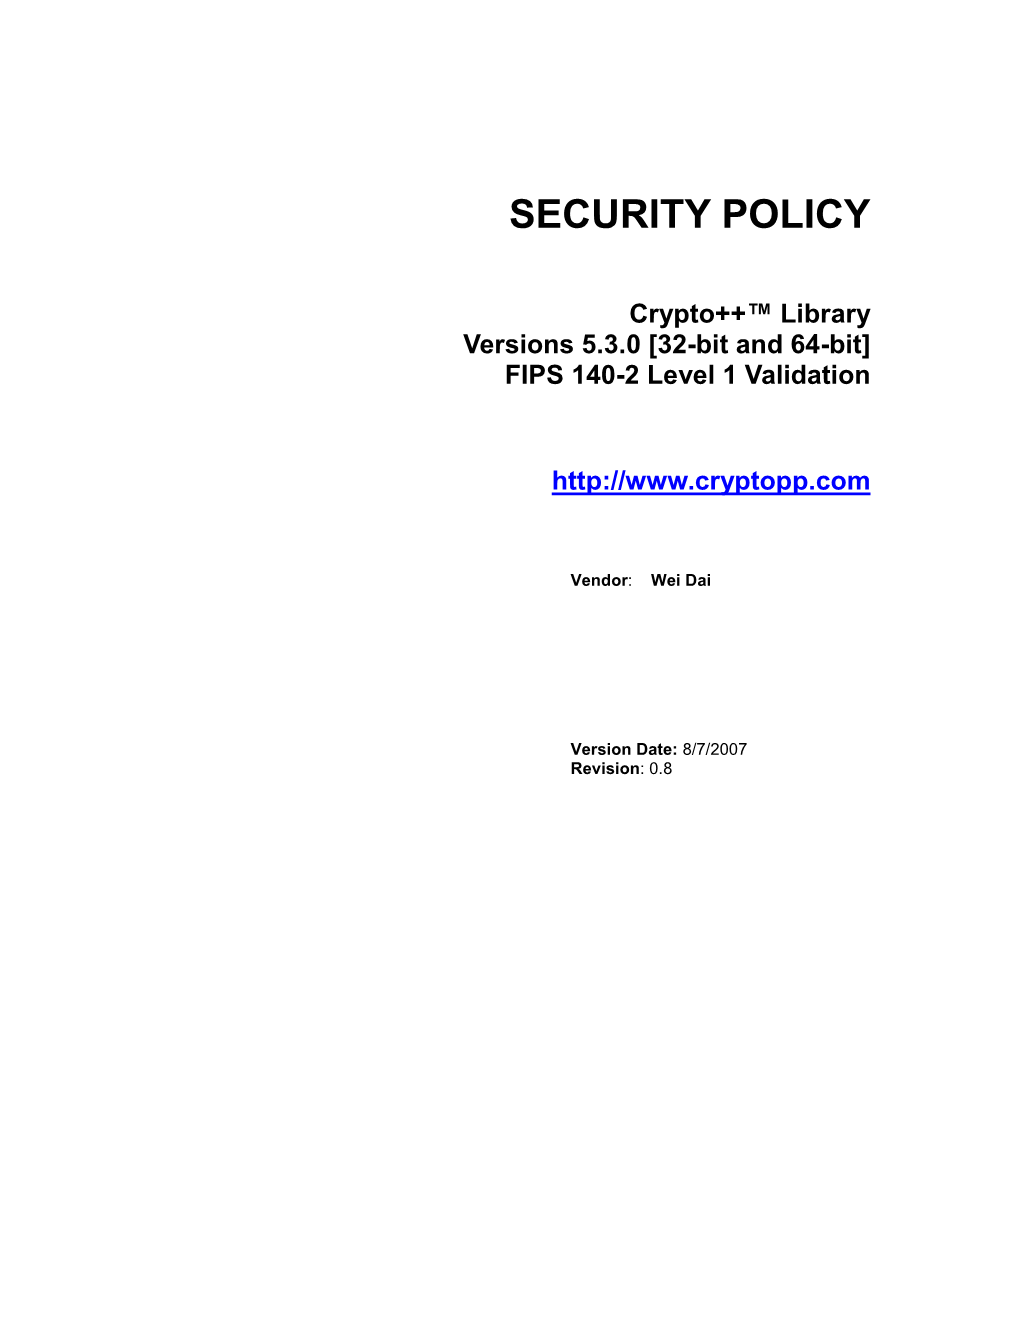 Security Policy